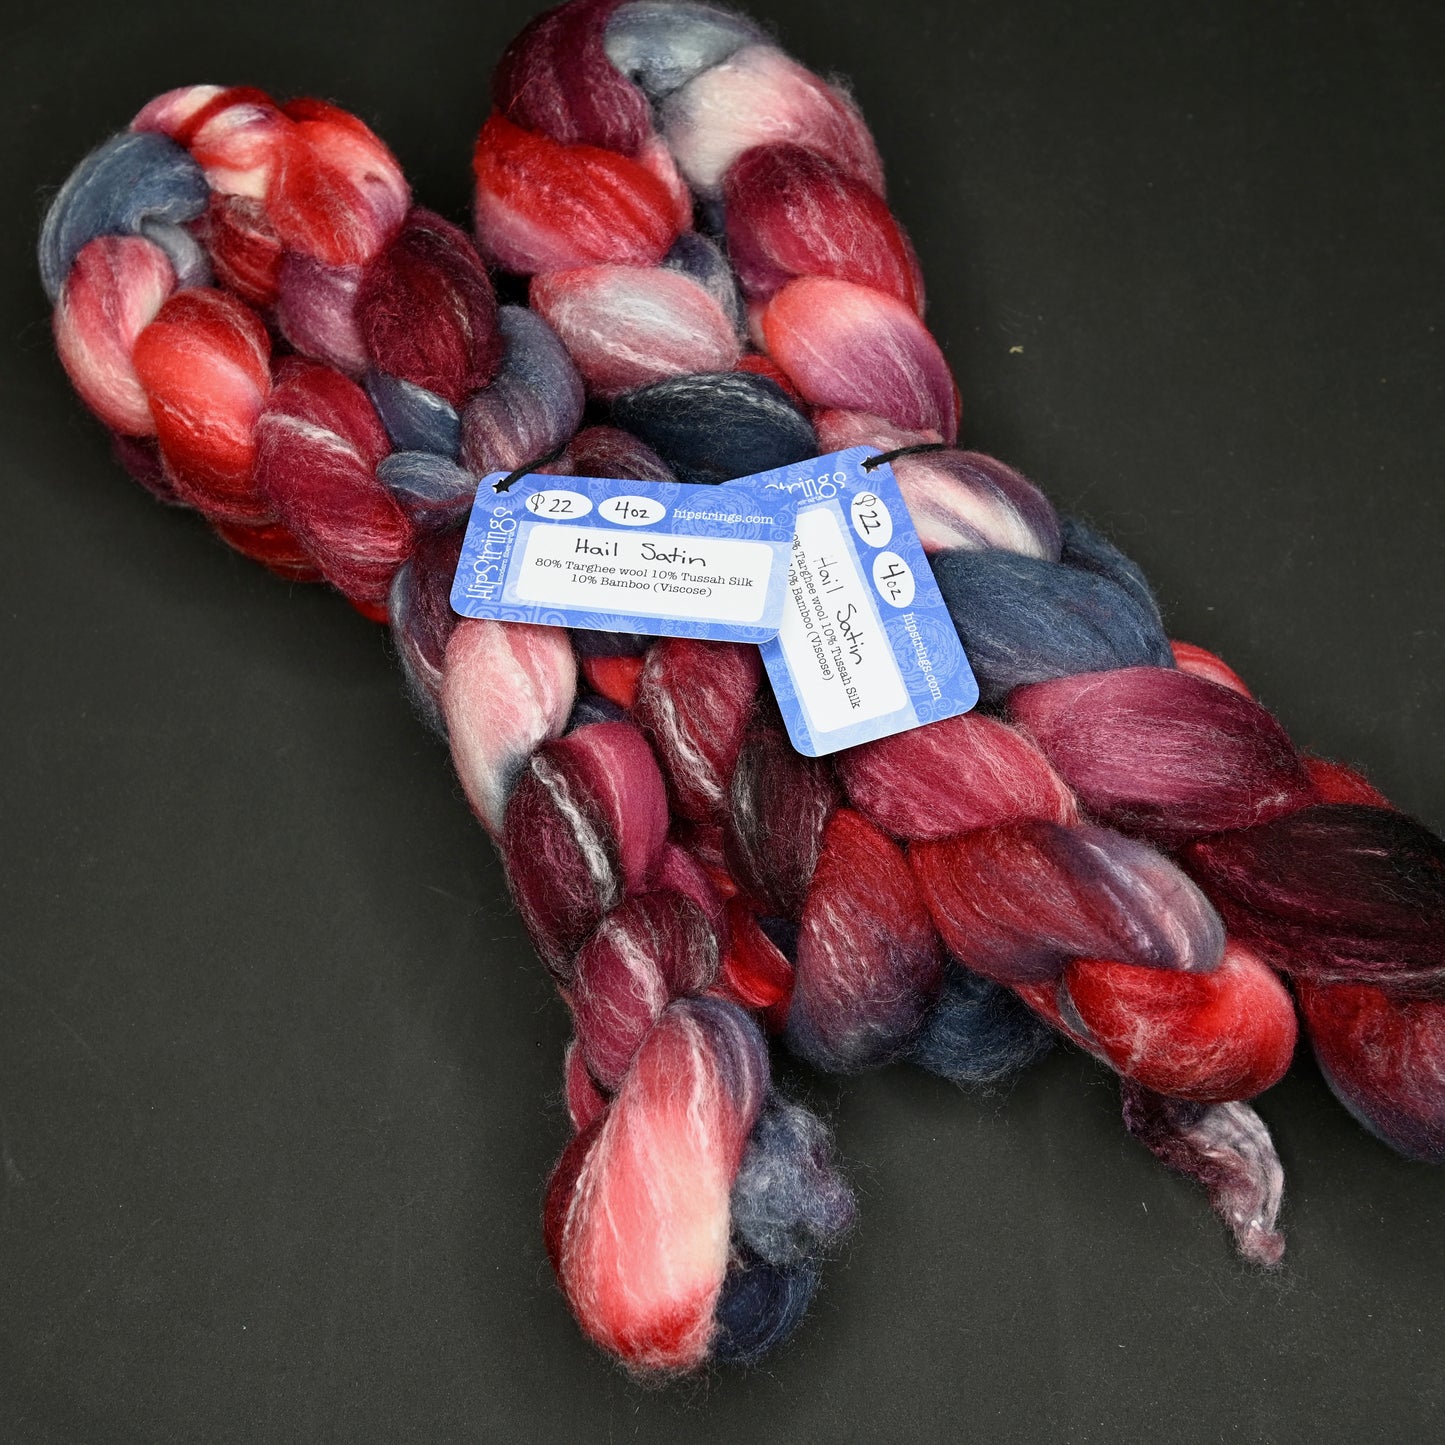 Hail Satin on Hand Dyed Targhee/Bamboo/Silk Combed Top - 4 oz